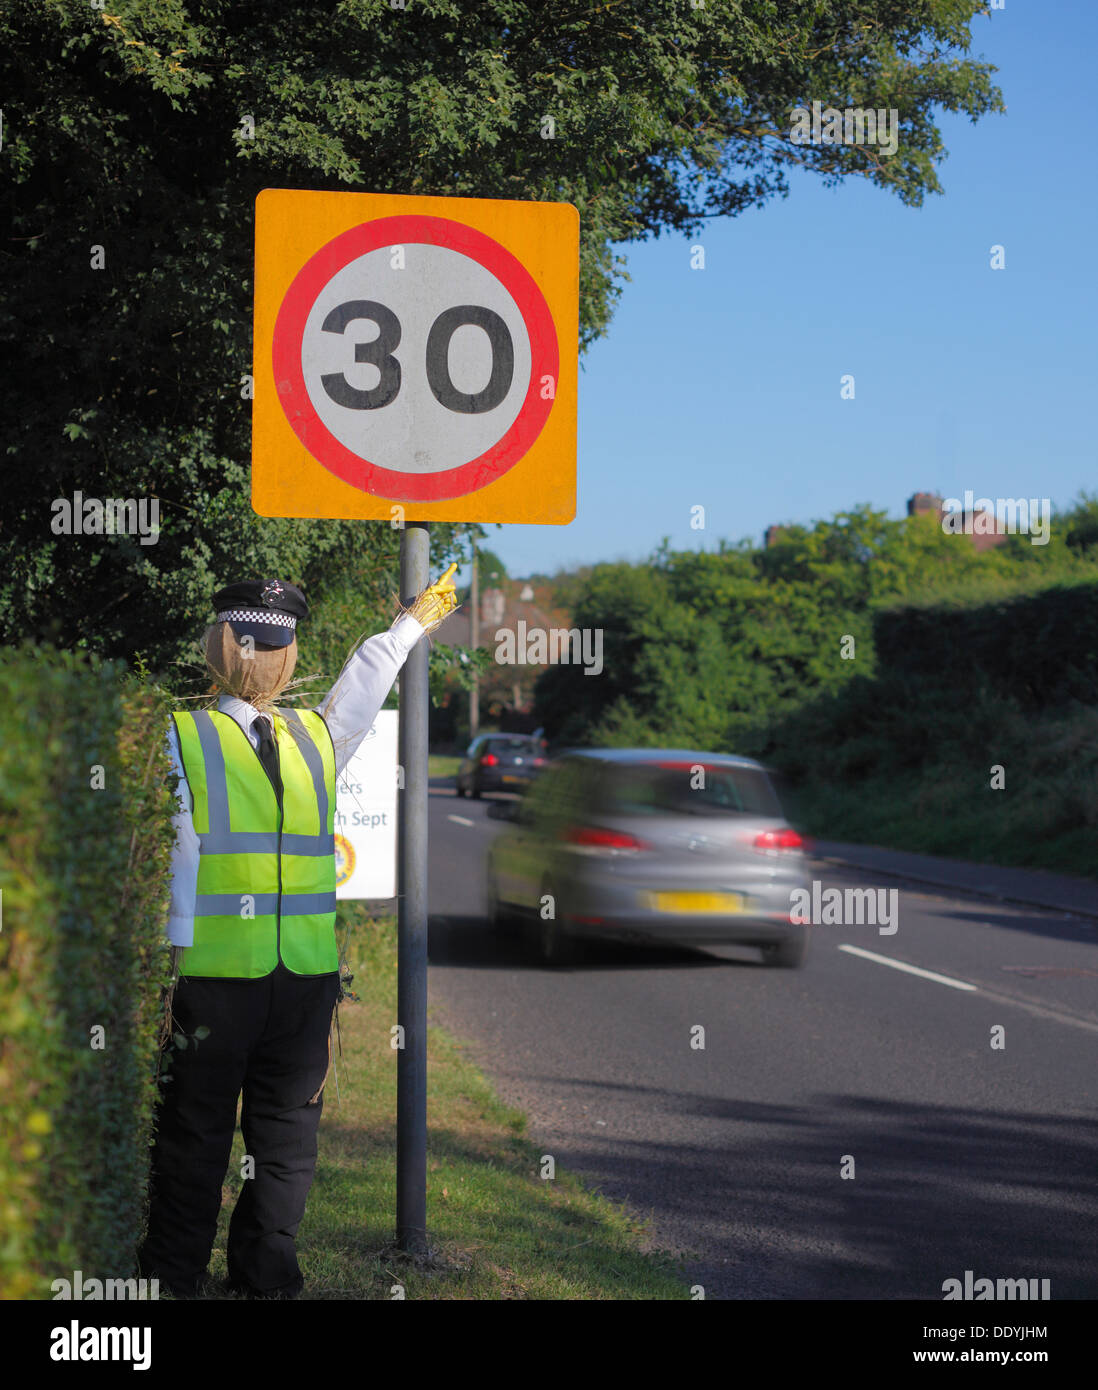 Guy mannequin dressed as a policeman pointing to a 30 mph speed sign. Stock Photo